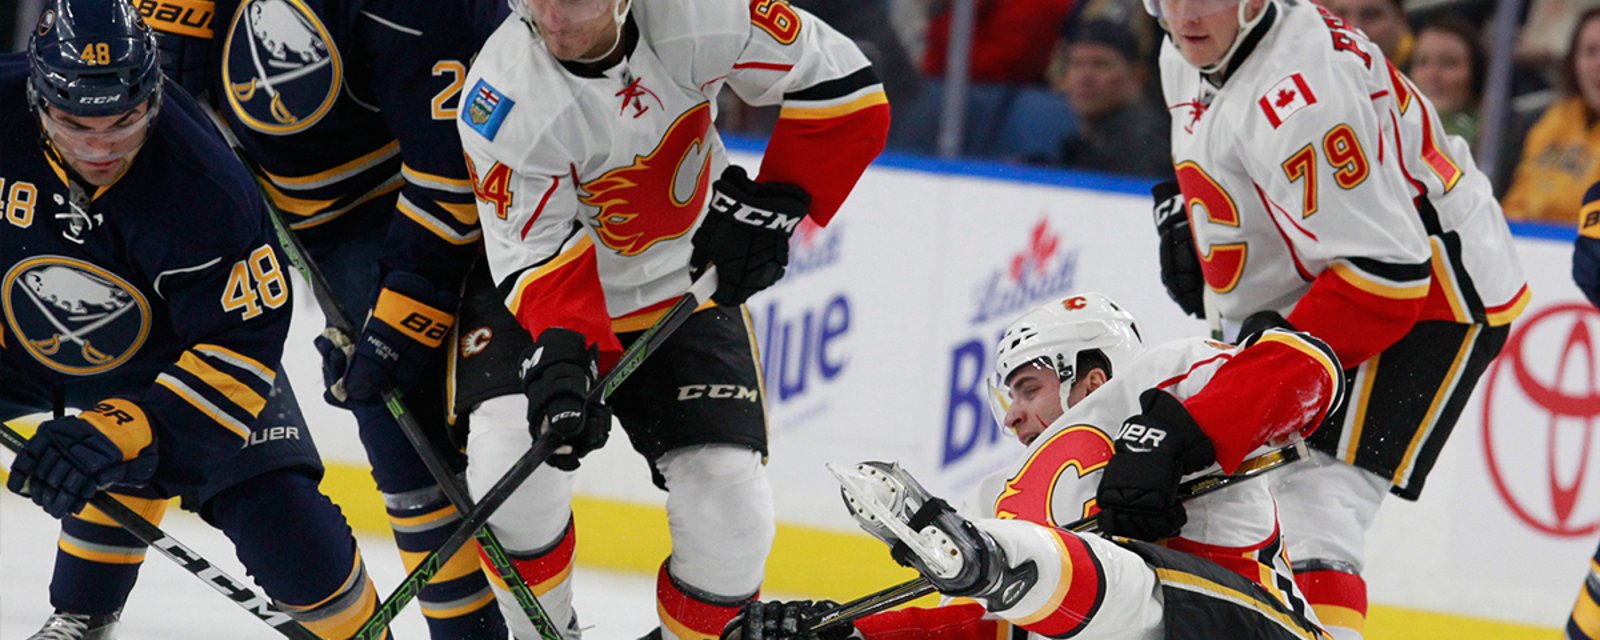 Breaking: Jagr/Jankowski and Flames waiver wire action